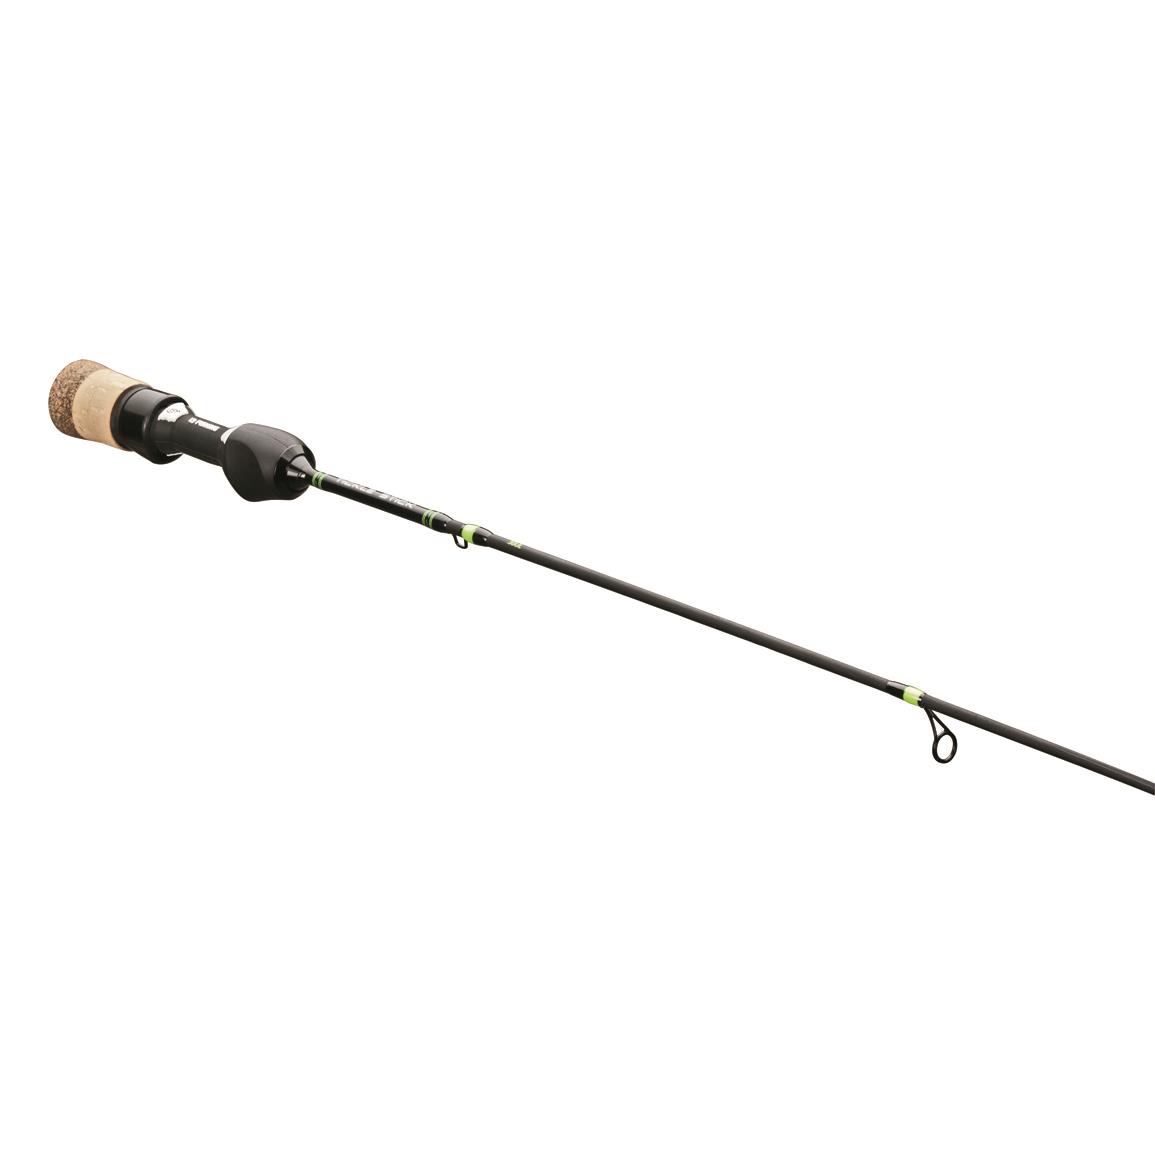 St. Croix Legend Black Ice Series Fishing Rod, 24, Light Power - 723878, Ice  Fishing Rods at Sportsman's Guide